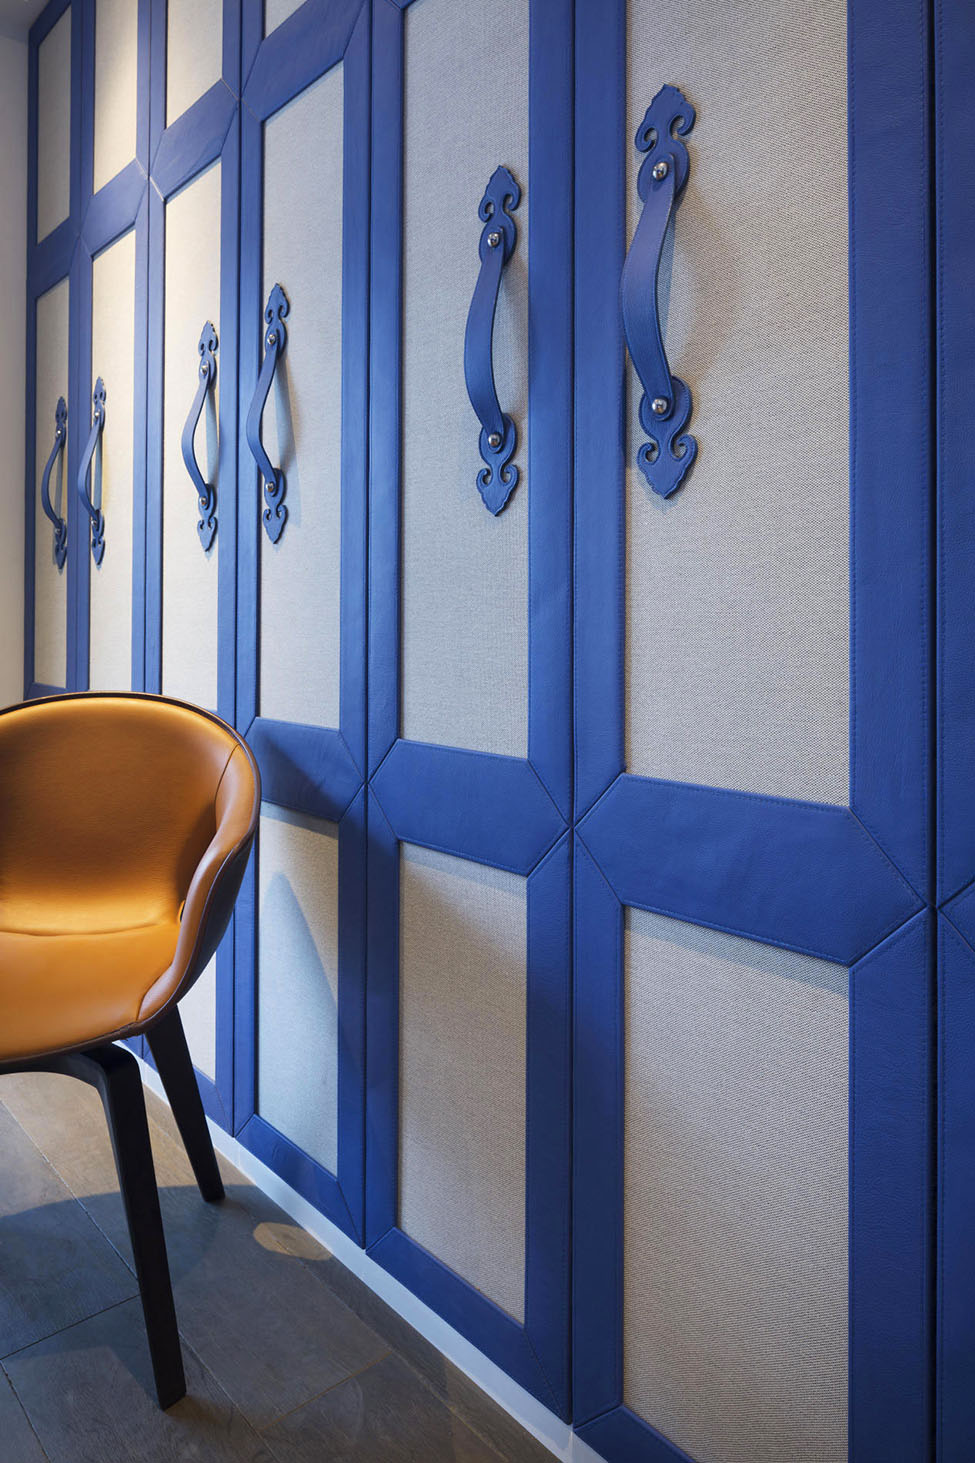 Blue And Covering Cool Blue And White Splash Covering The Built In Wall Wardrobe Inside Blue Penthouse By Dariel Studio Unitary Room Dream Homes A Pair Of Functional And Stylish Home Brimming With Artistic Interior Touch